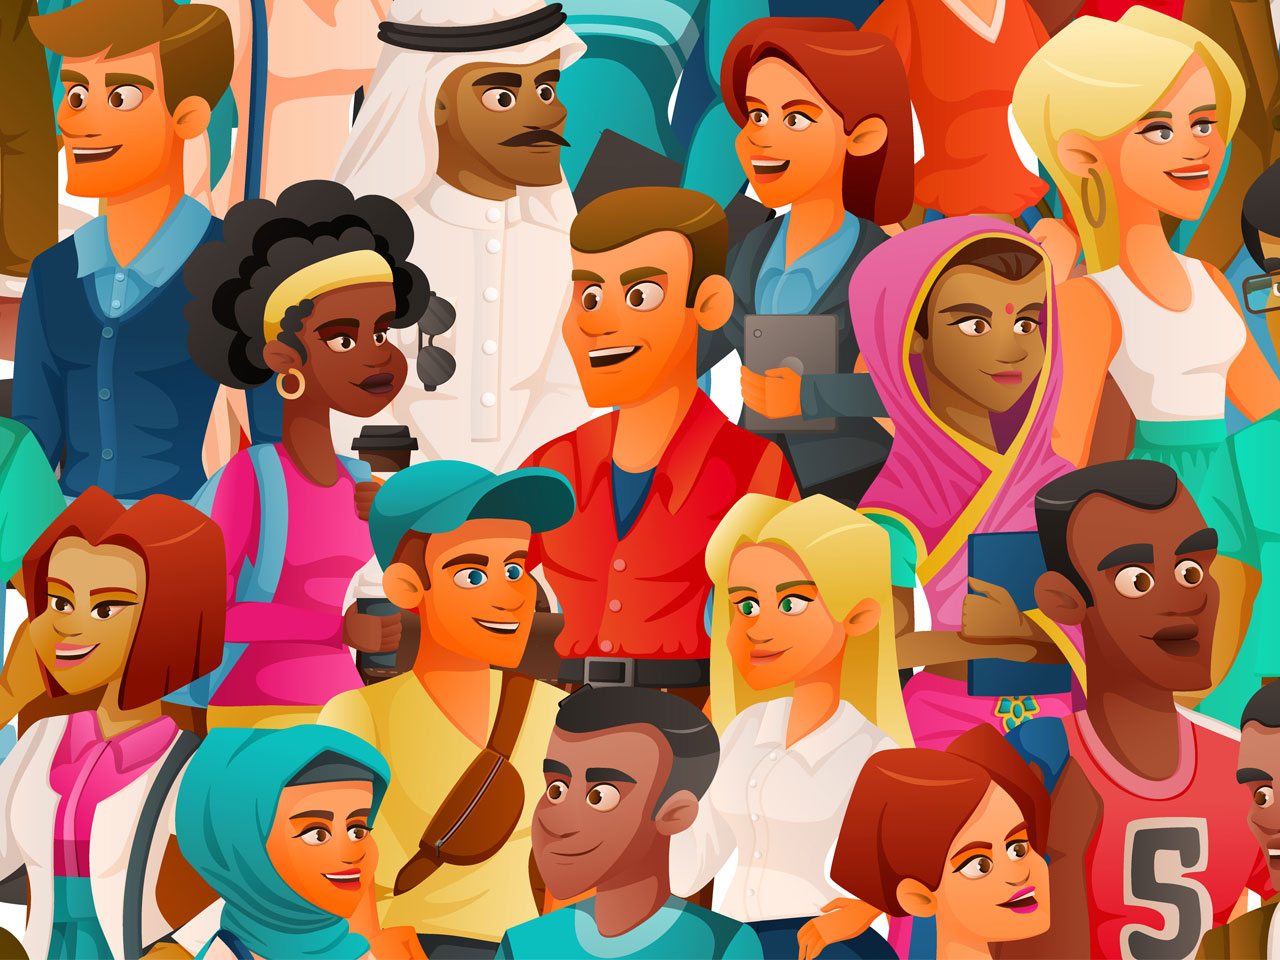 Cartoon characters diversity composition with view crowd with young people colour wearing different outfits